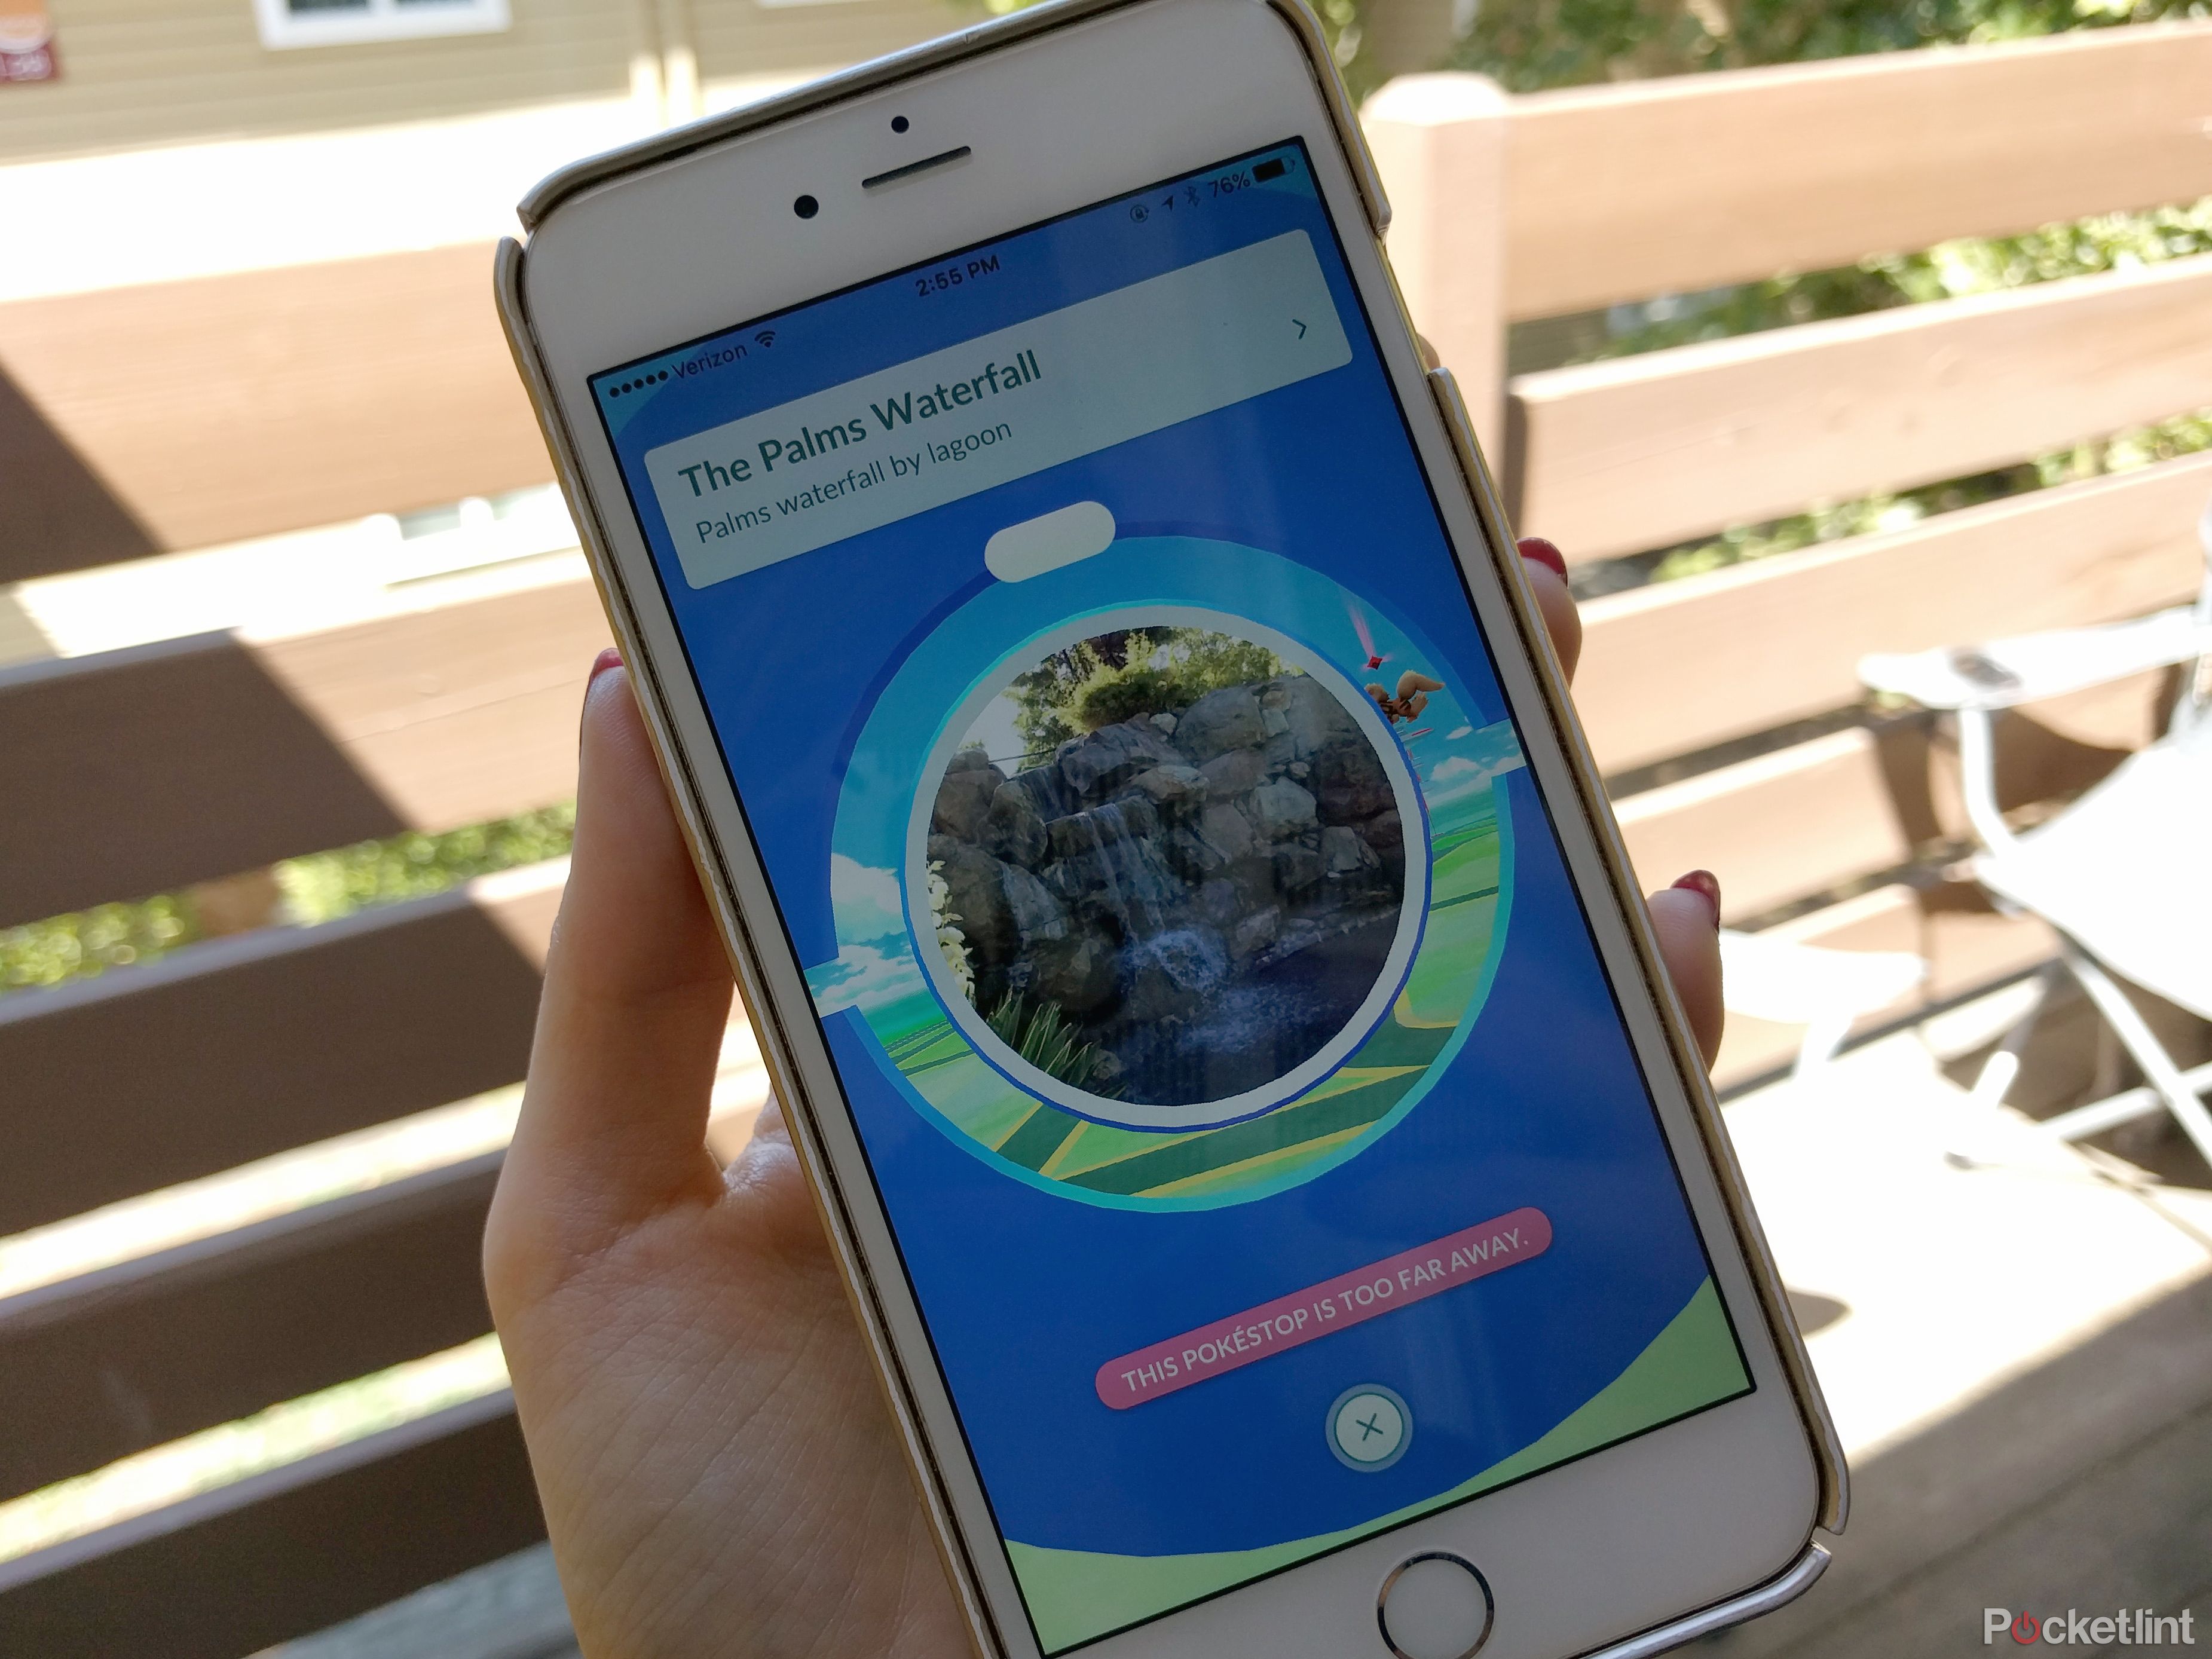 pokemon go for ios fixes that big privacy issue with google accounts image 1